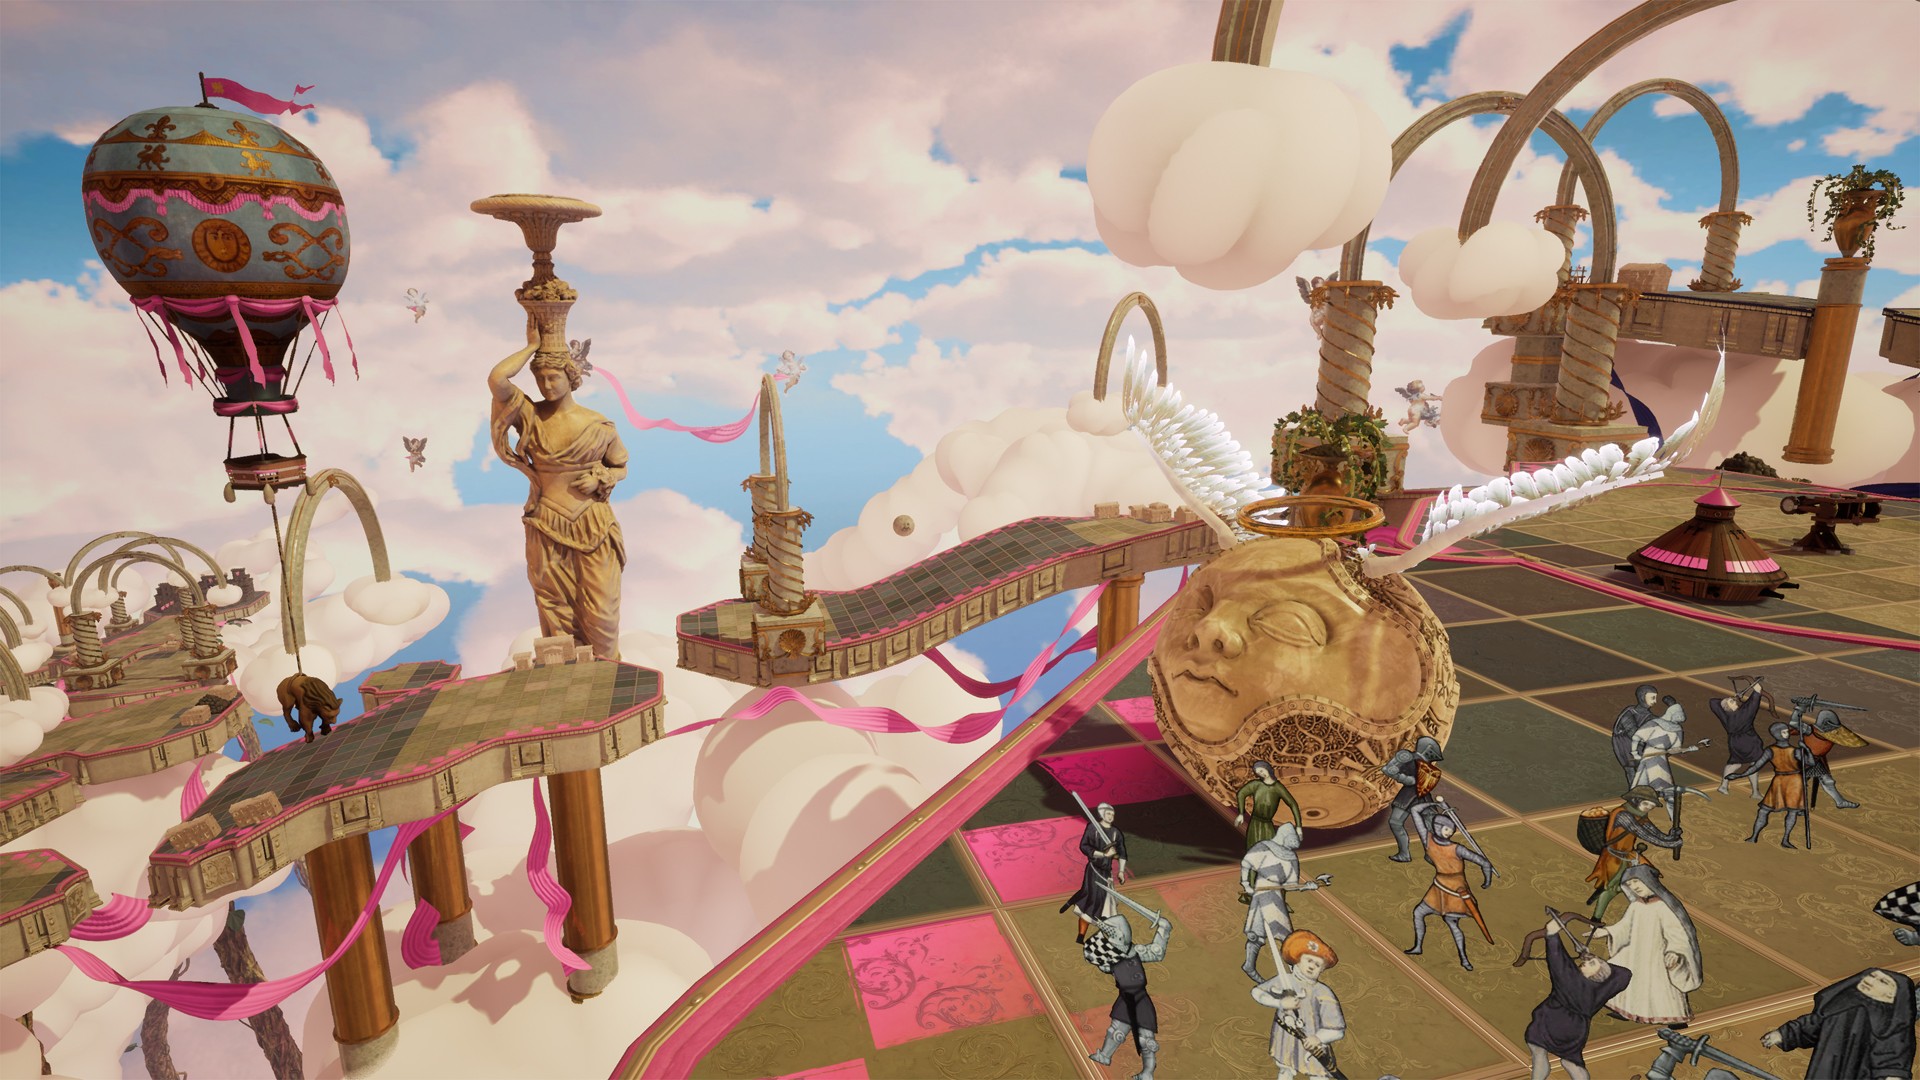 Best Tower Defense Game: Pink-dotted levels in the clouds; Rock of Ages 2's tiled path features a giant ornate ball with angel wings and a human face.